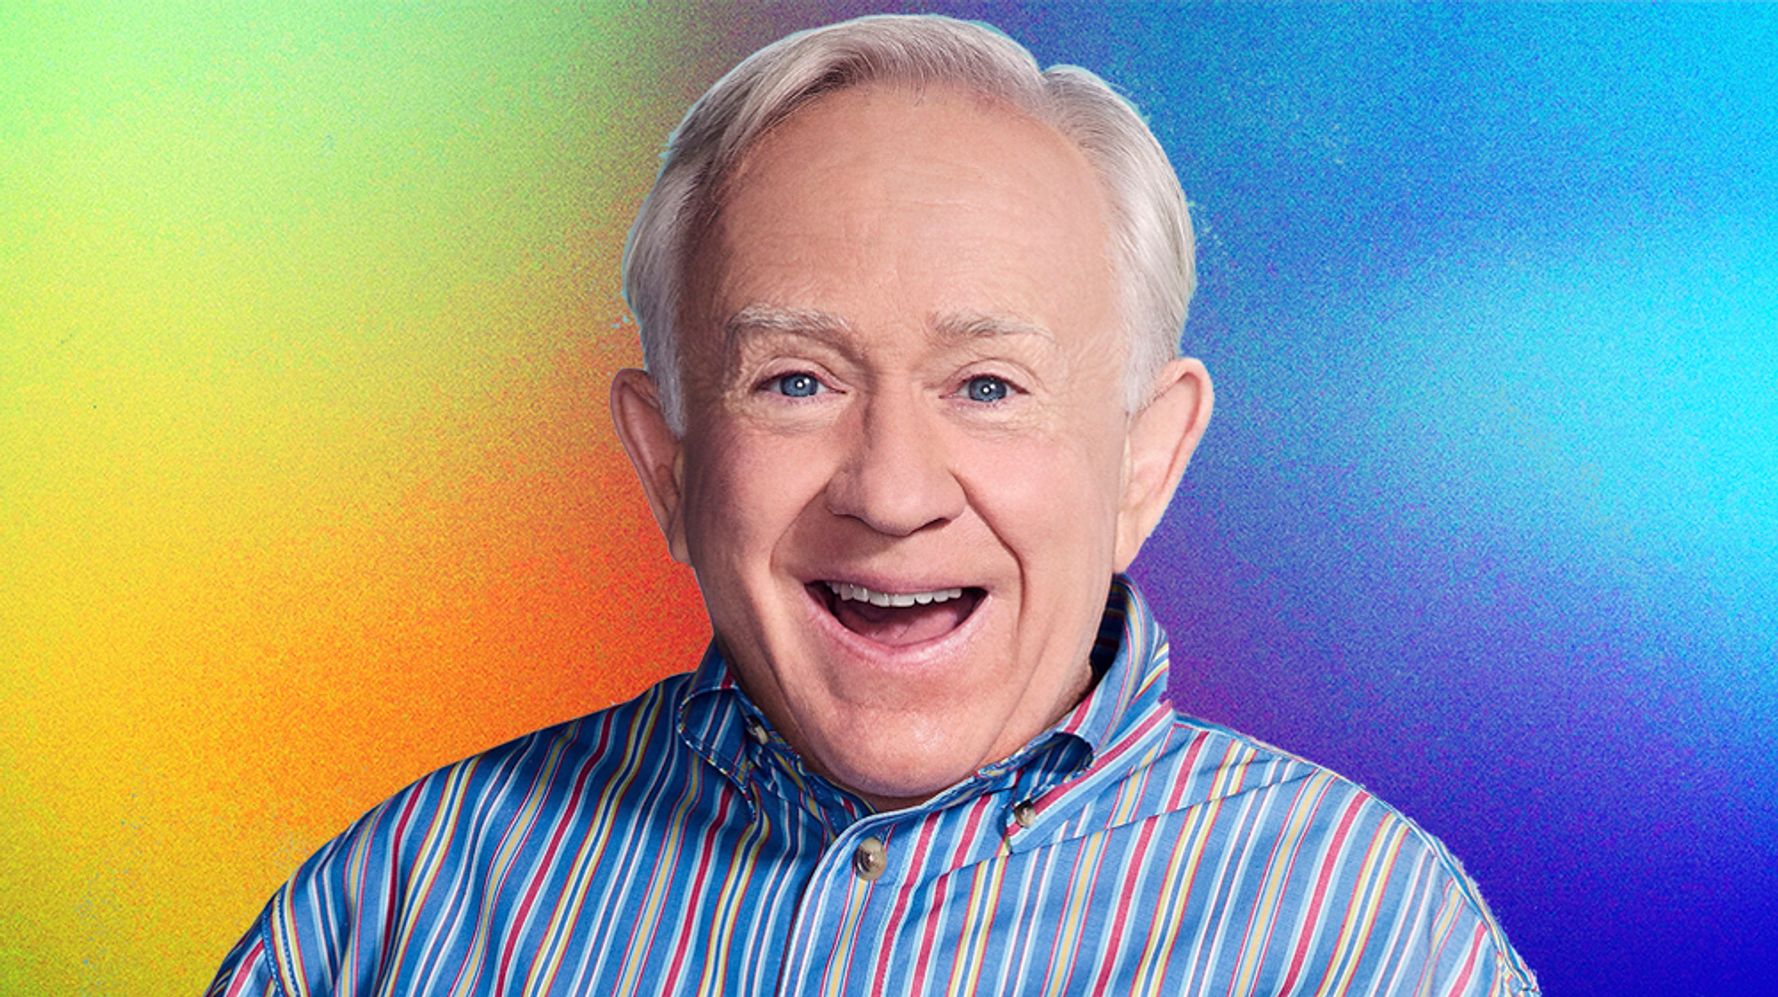 Leslie Jordan: ‘I Had Agents That Would Tell Me ‘Don’t Swish’, But Success Came From Being Myself’